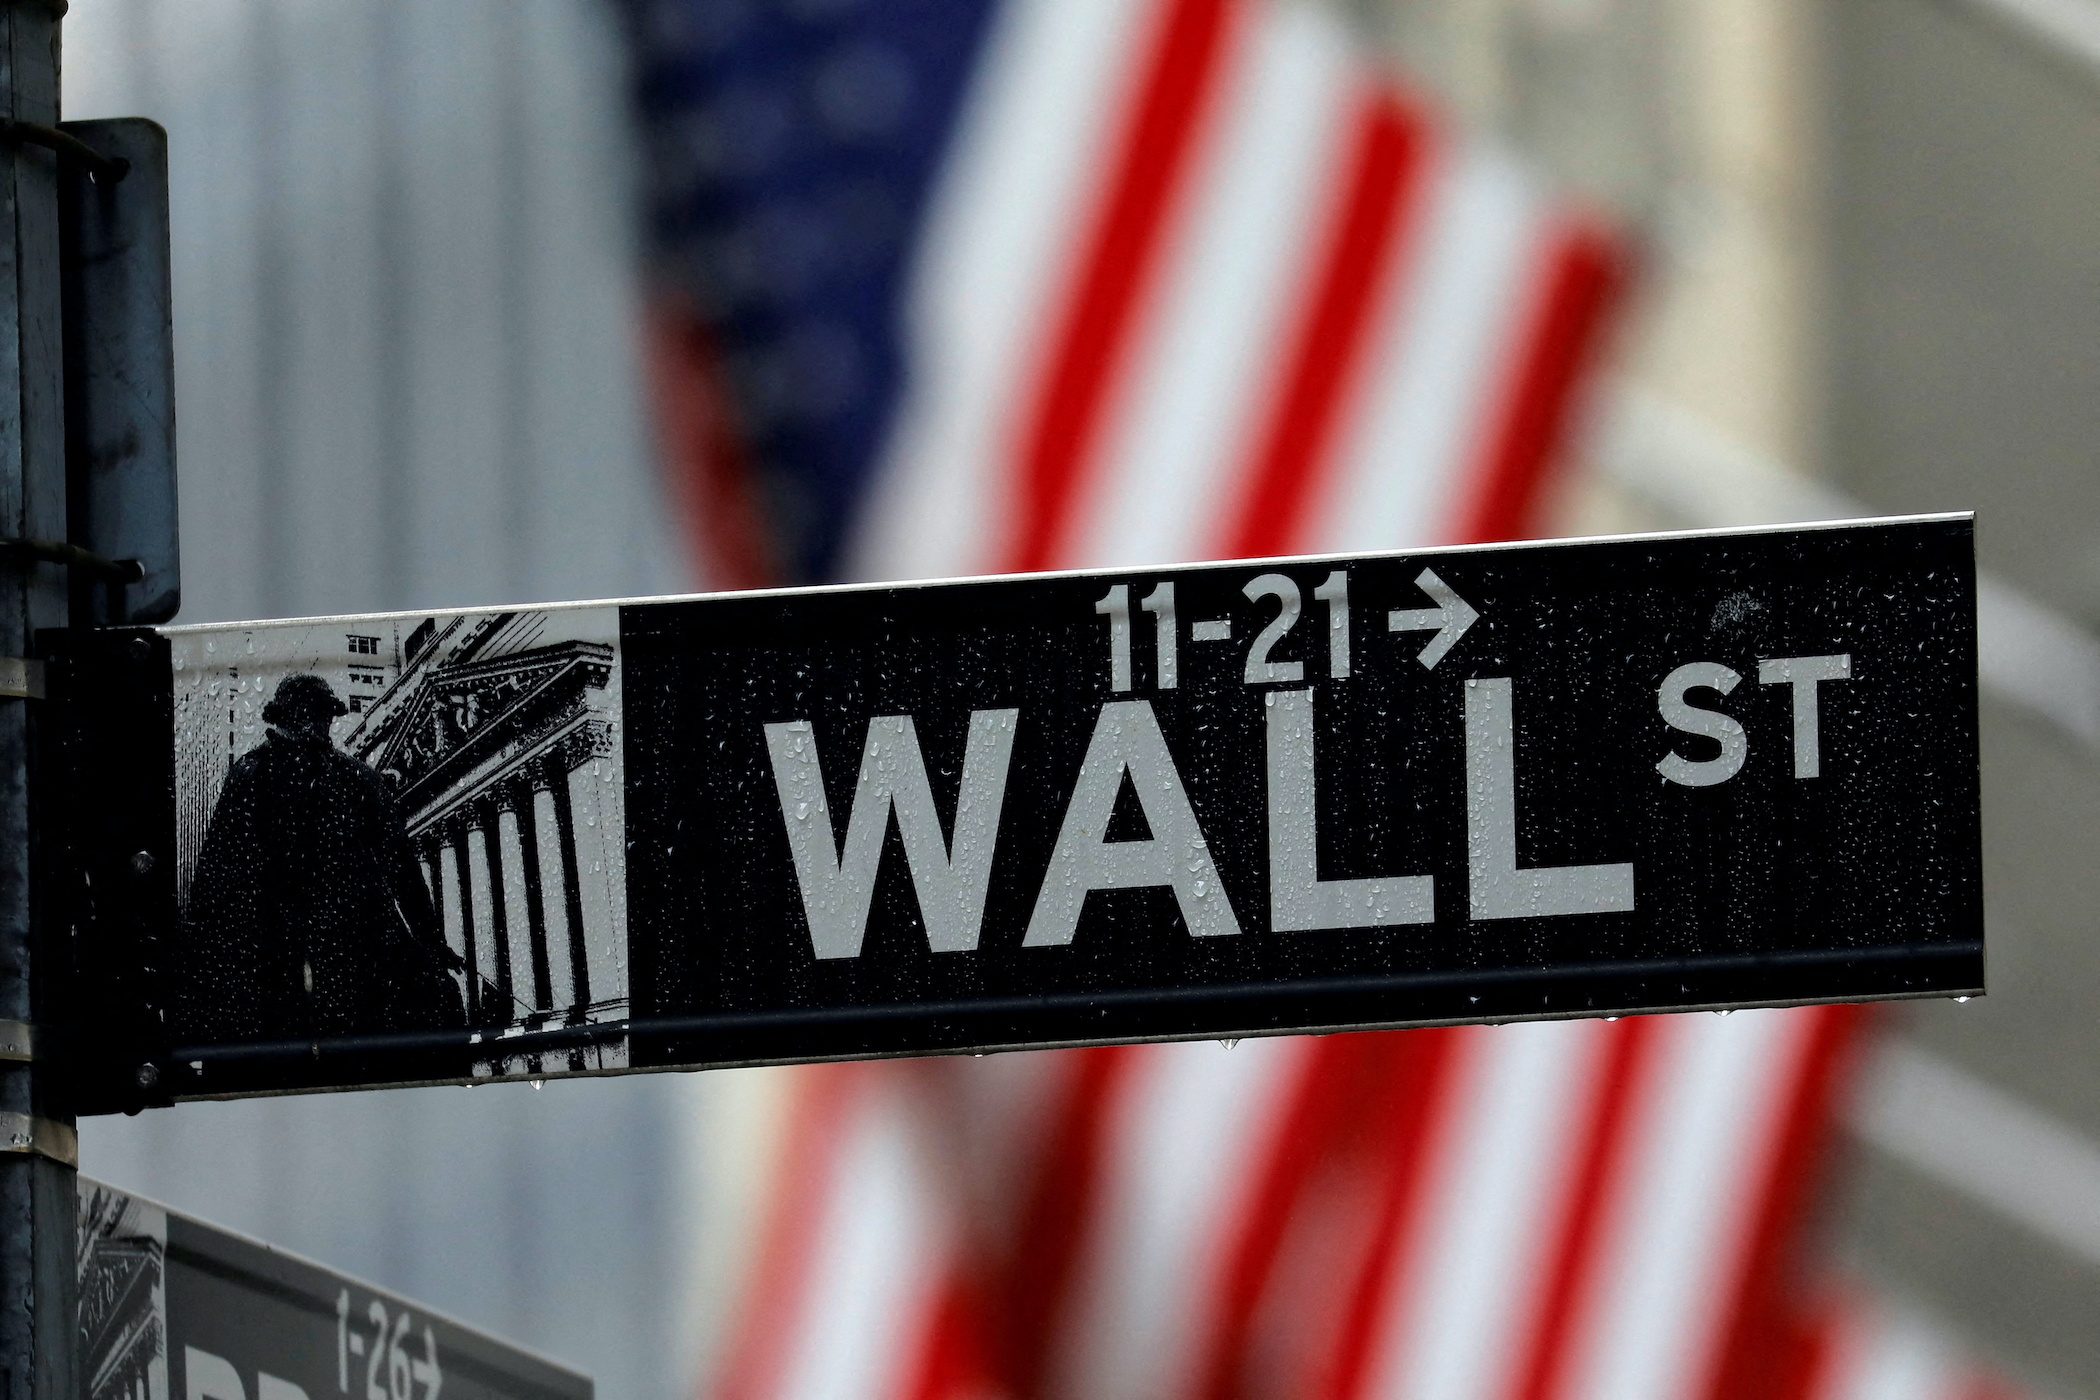 Wall Street hands out biggest bonuses since 2006